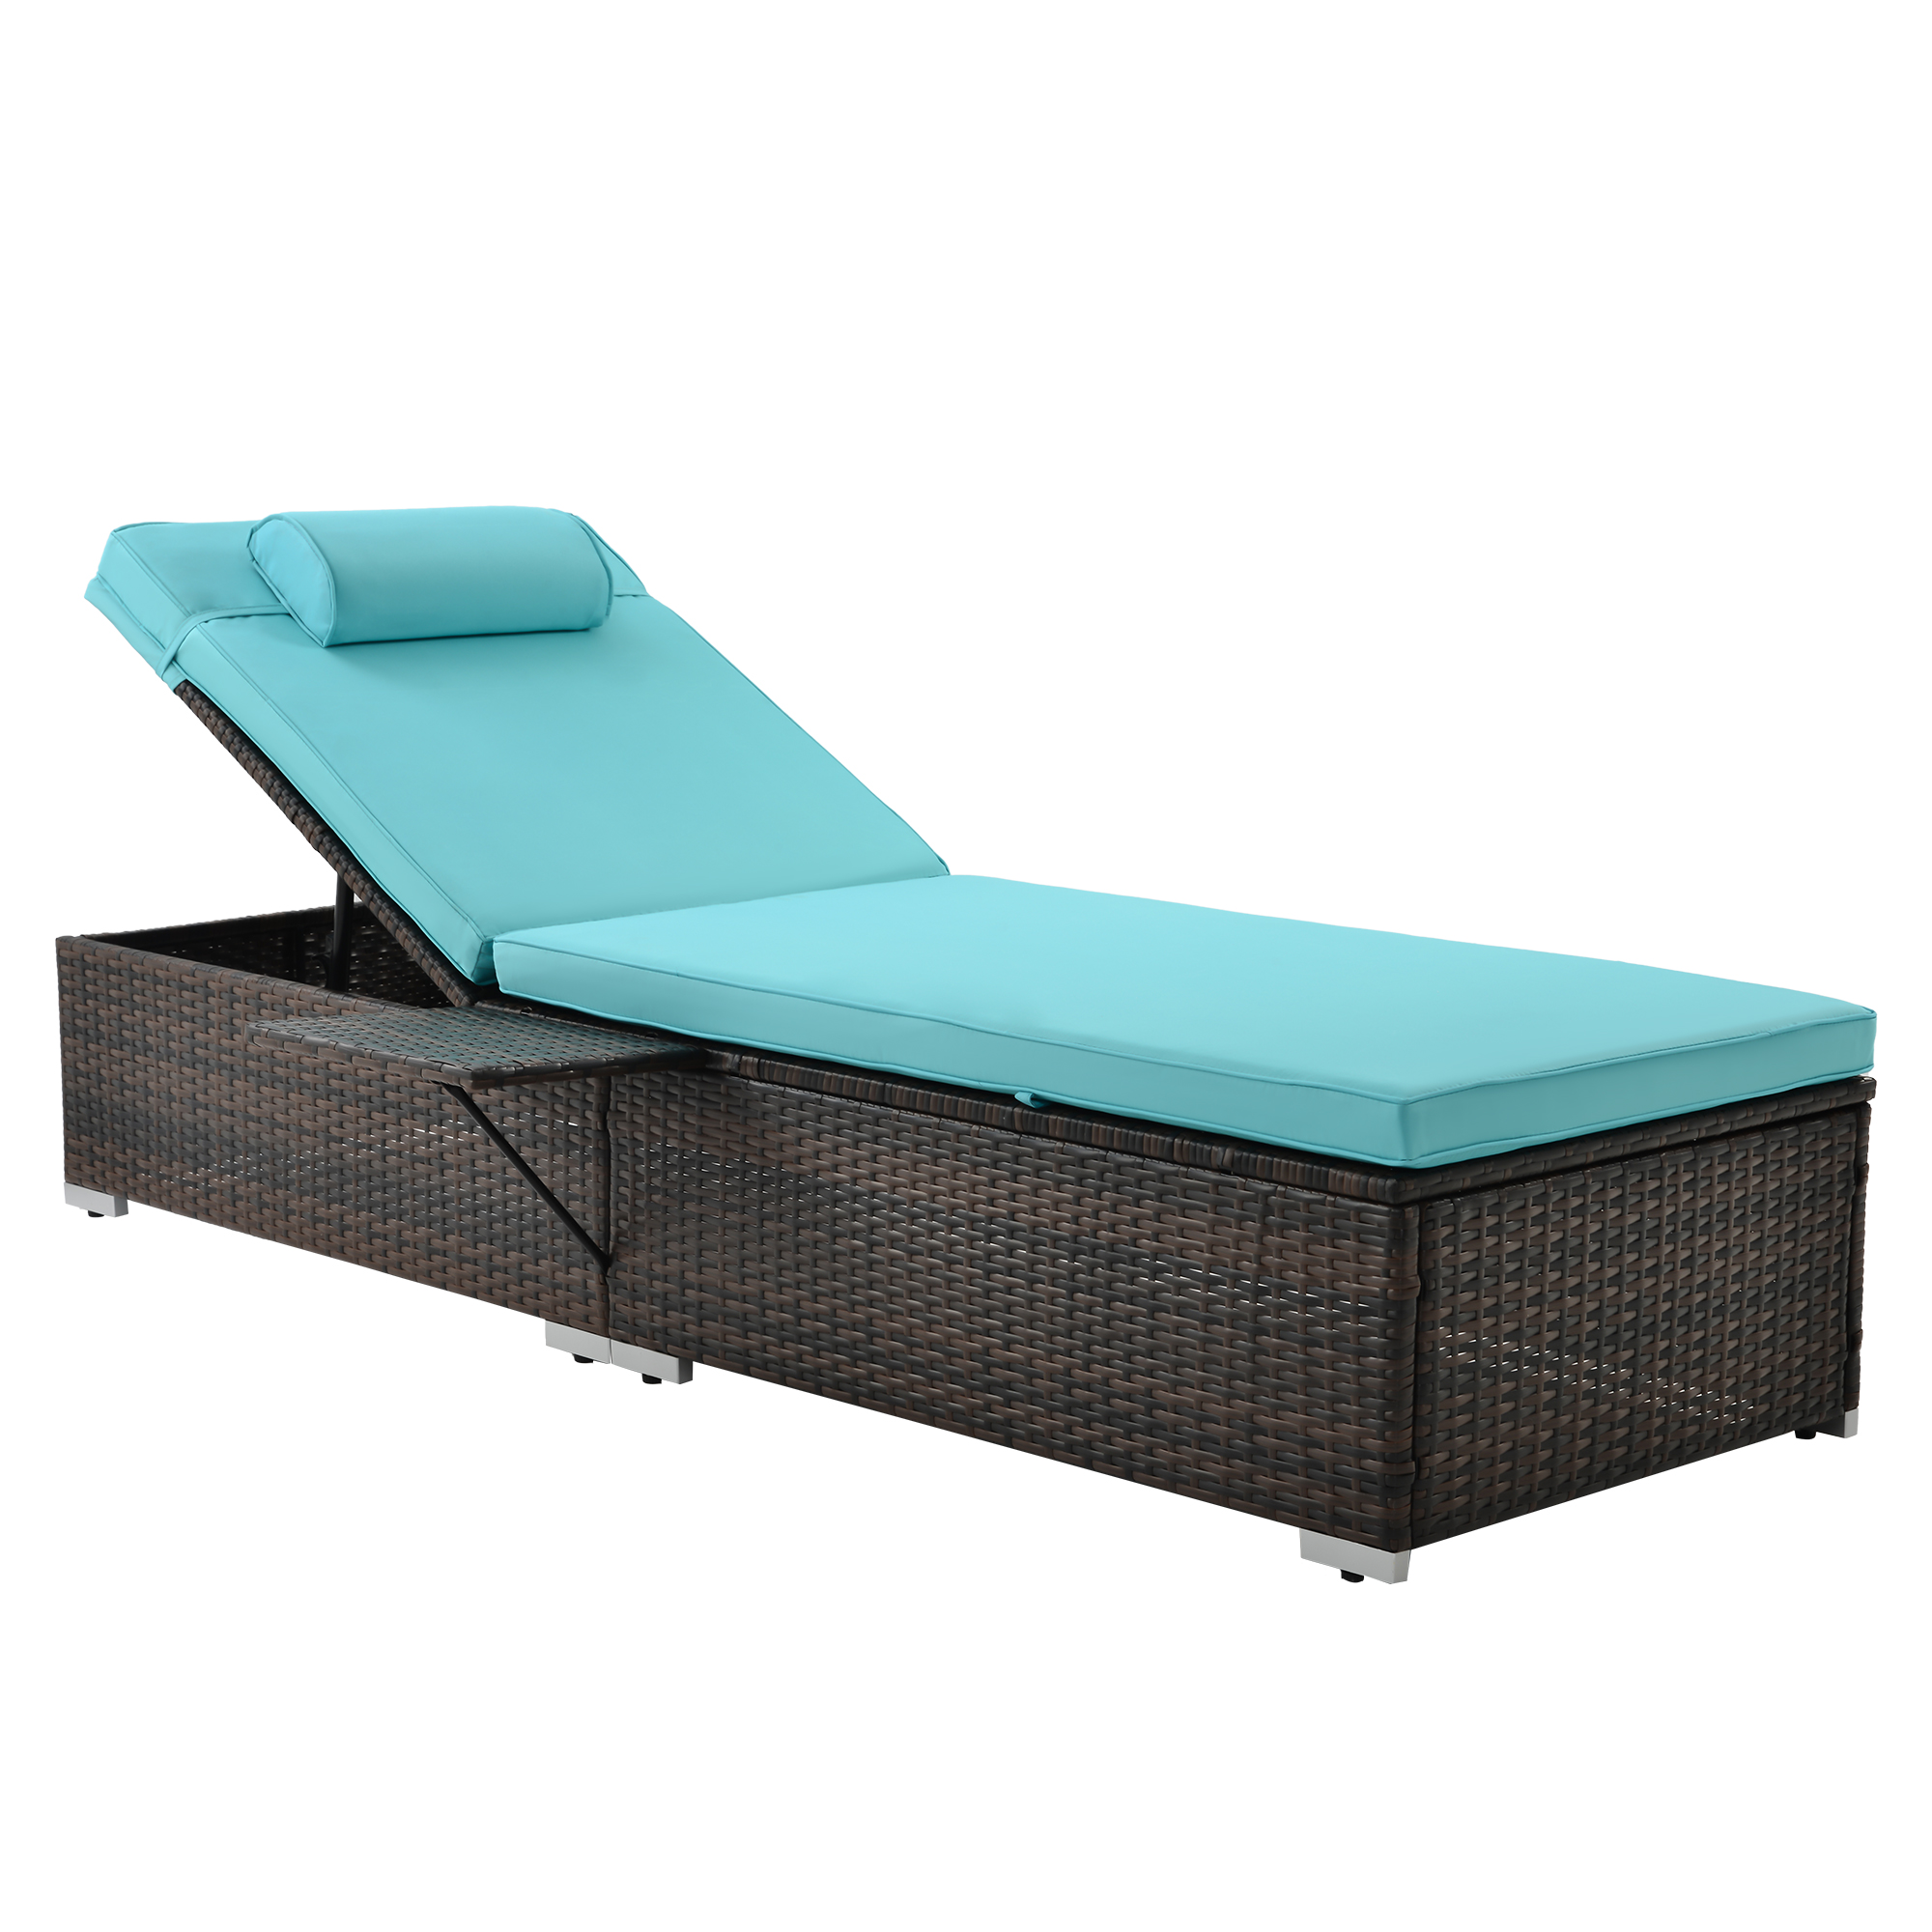 ENYOPRO 2 Piece Outdoor Chaise Lounge Chairs, Adjustable Chaise Chairs with Side Table, Head Pillow and Cushions, for Outdoor Patio Beach Pool Backyard PE Rattan Reclining Chairs Furniture Set, K2697 - image 5 of 11